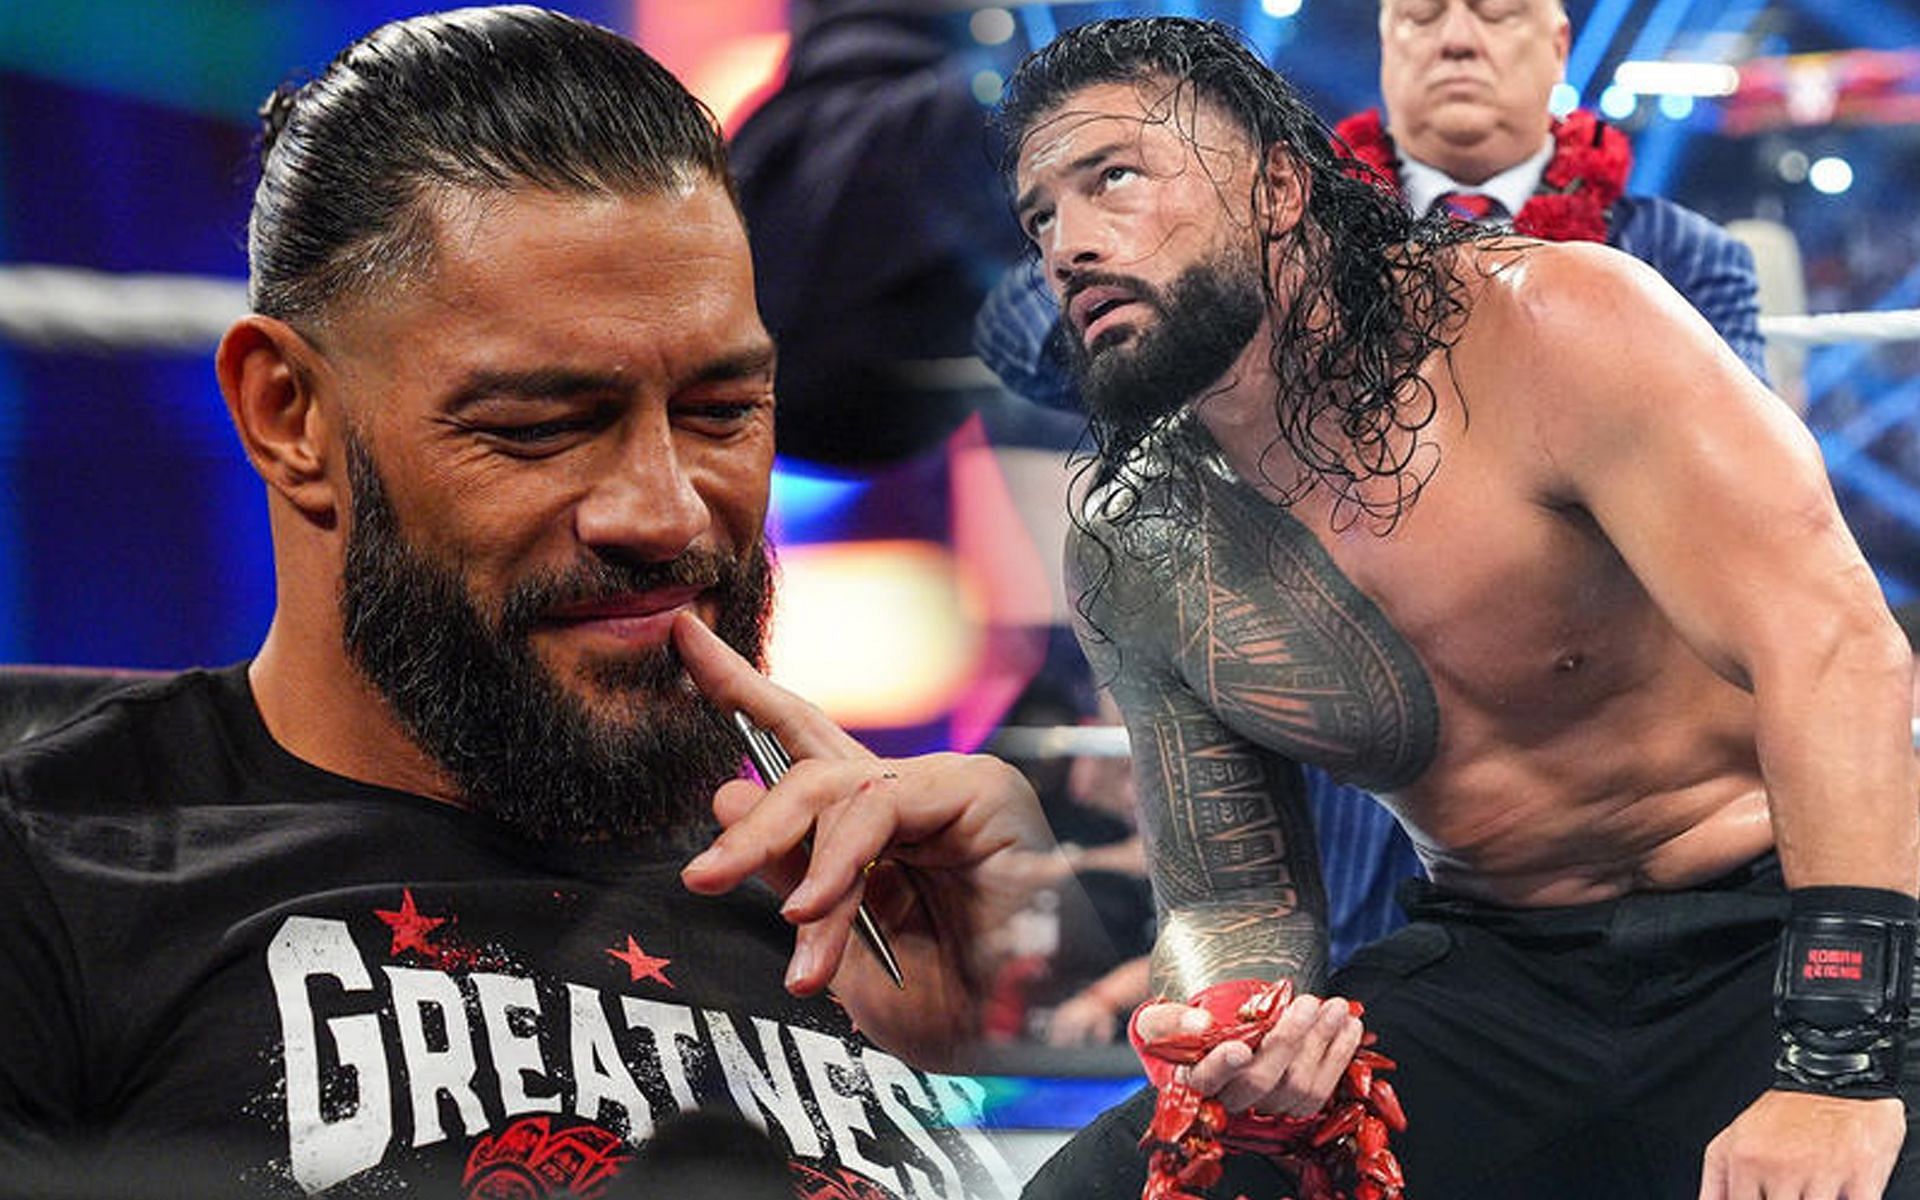 Roman Reigns' title reign to end at the hands of former WWE champion